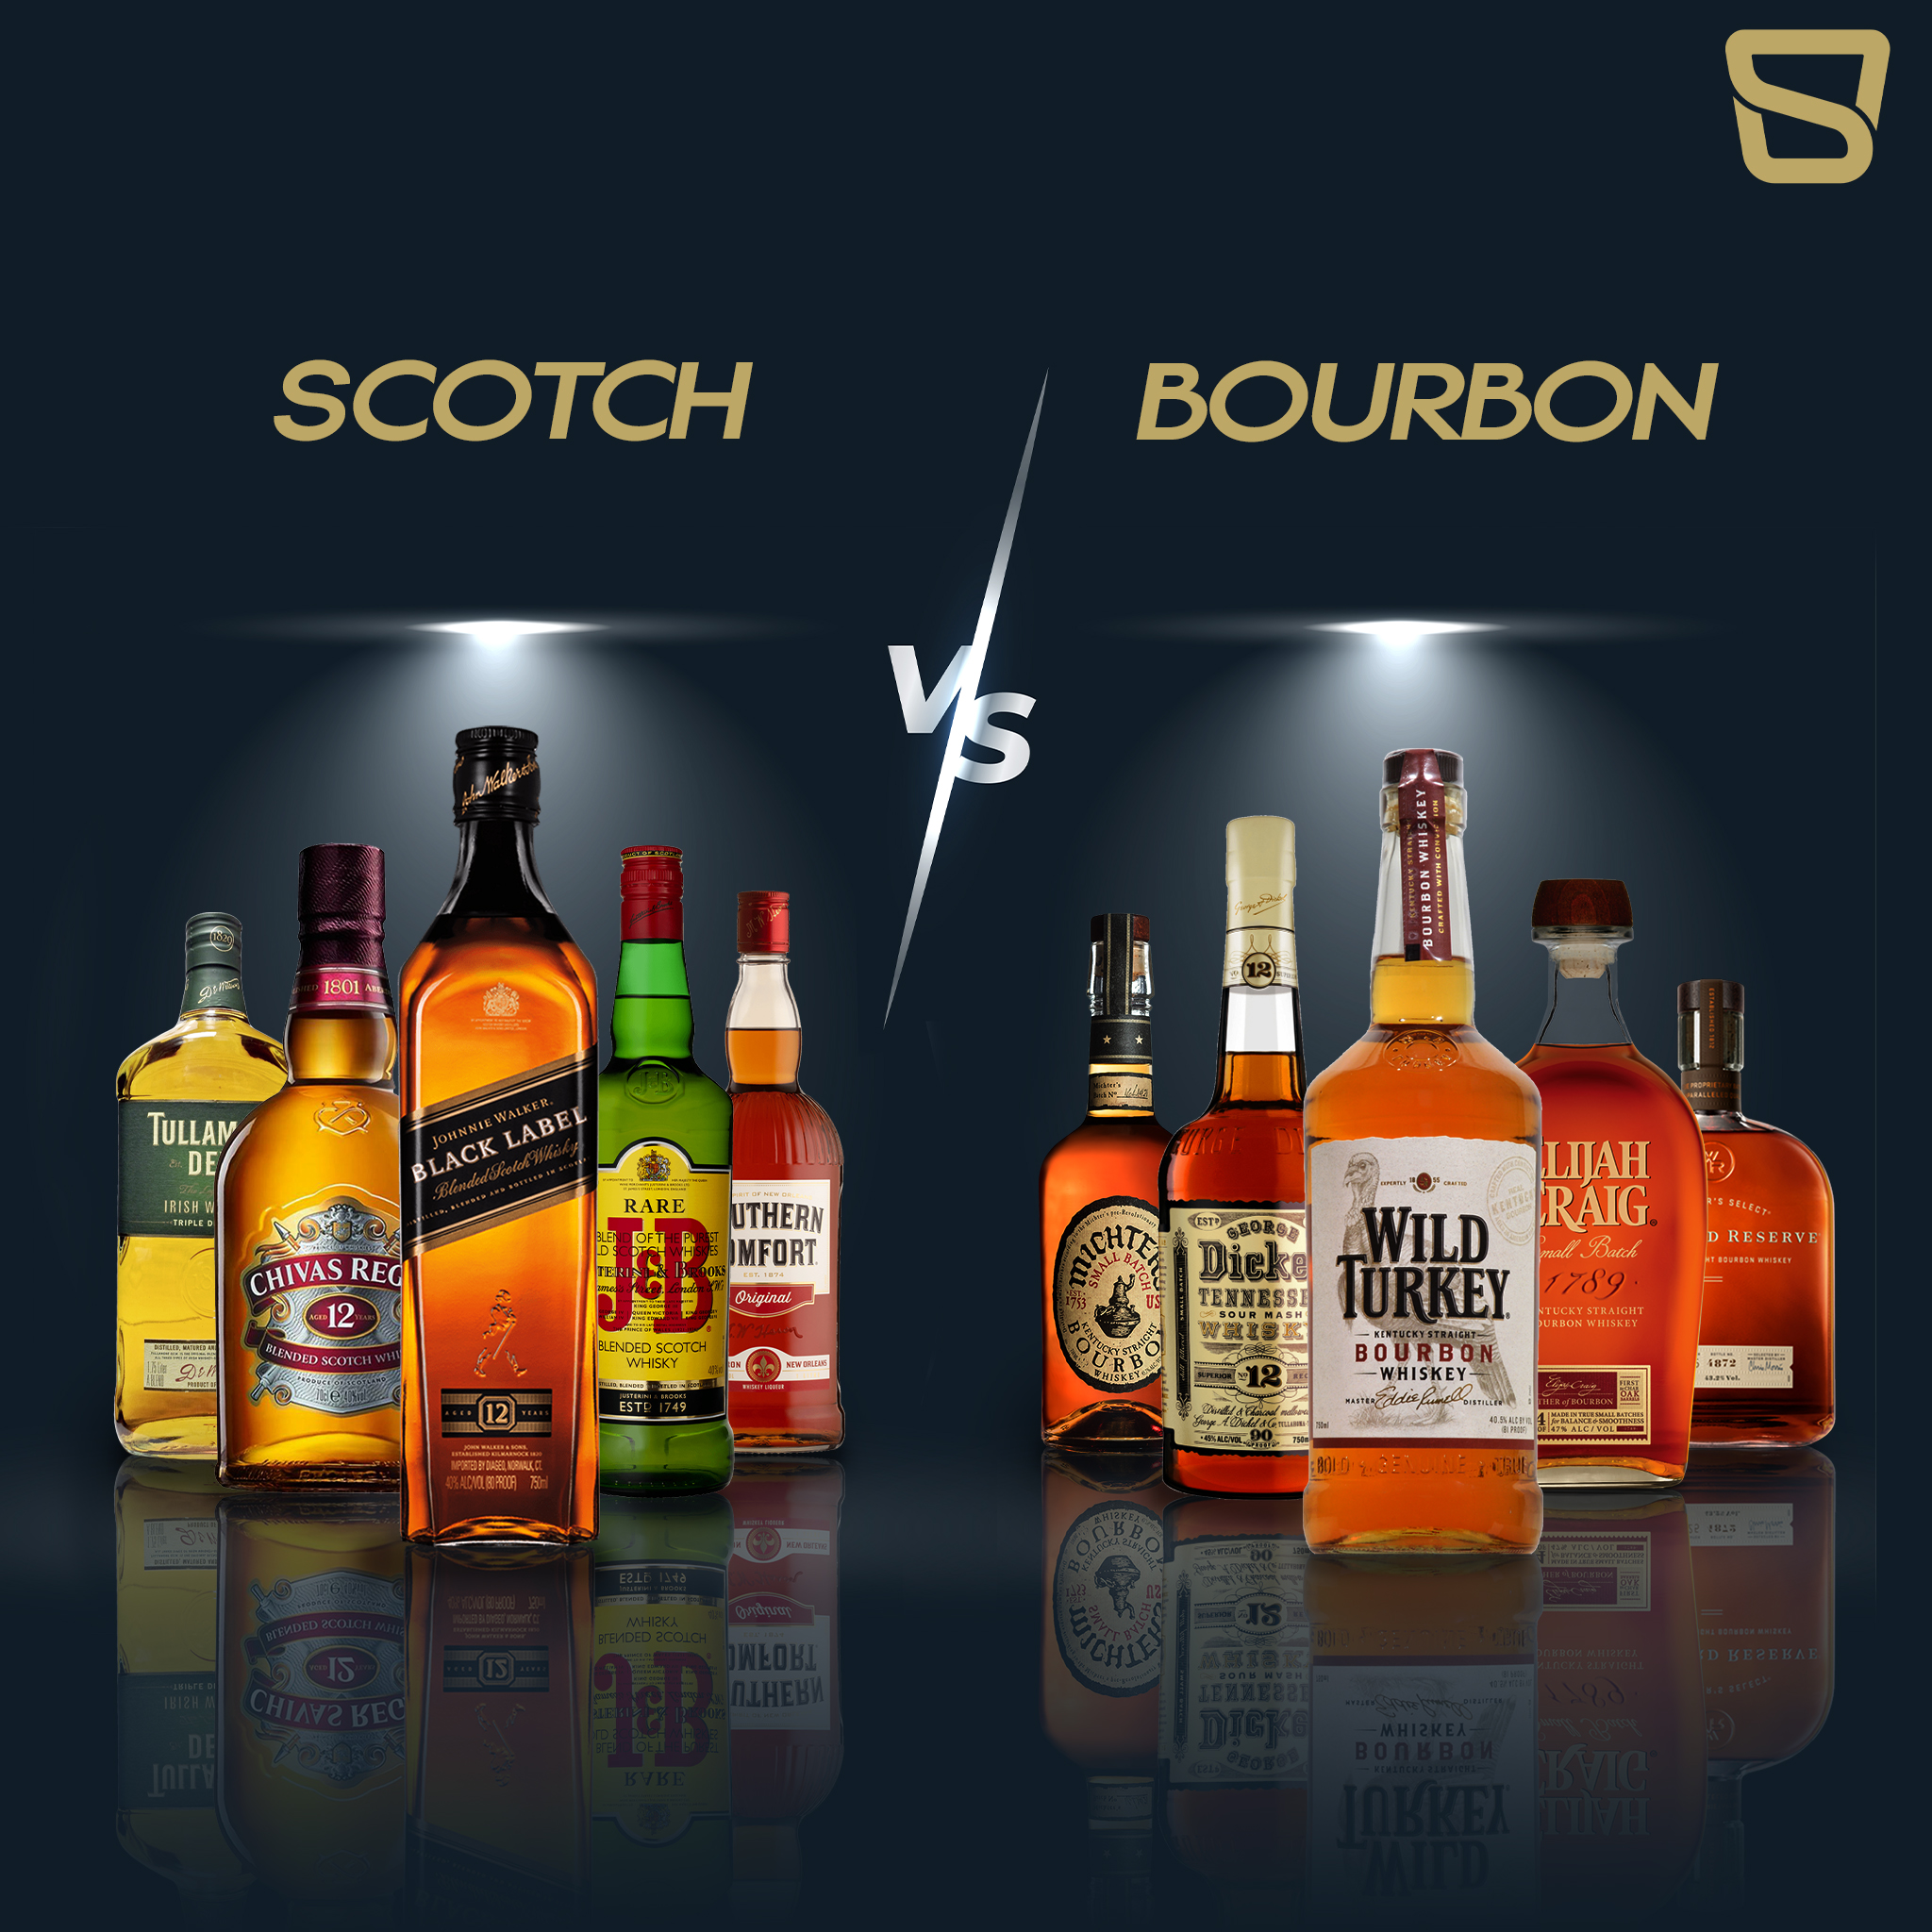 Bourbon Vs Scotch – know the difference